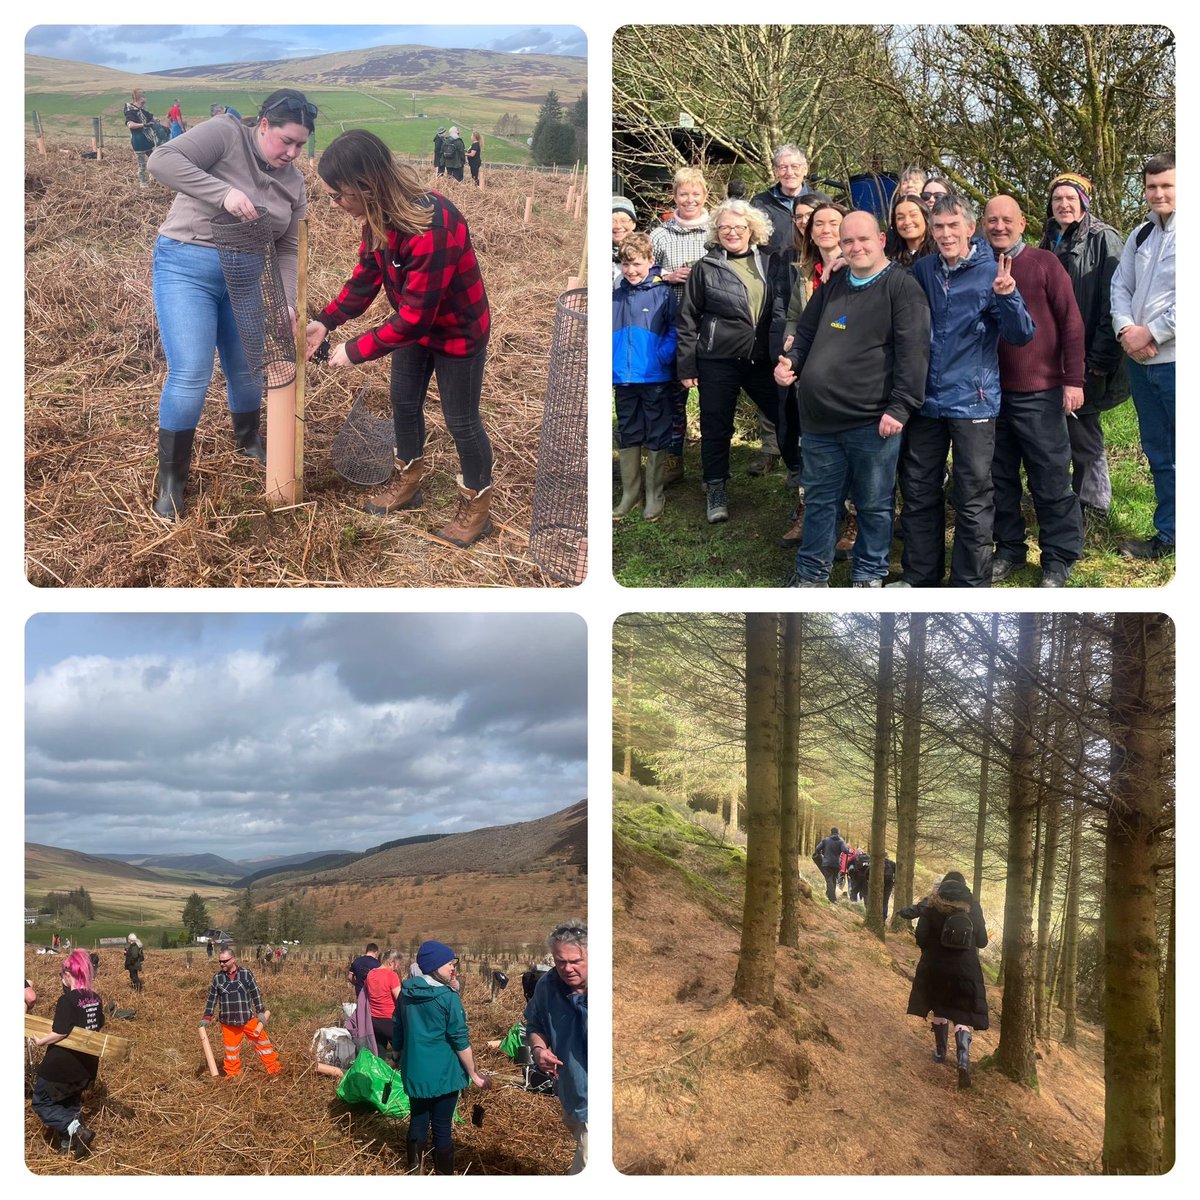 Today we celebrated our Annual Tree Planting Day at the Phoenix Forest in Glenlude. We planted over 250 trees to celebrate the recovery journey of everyone who has completed their programme with Phoenix. A huge thank you to our long term partnership and friends @JohnMuirTrust